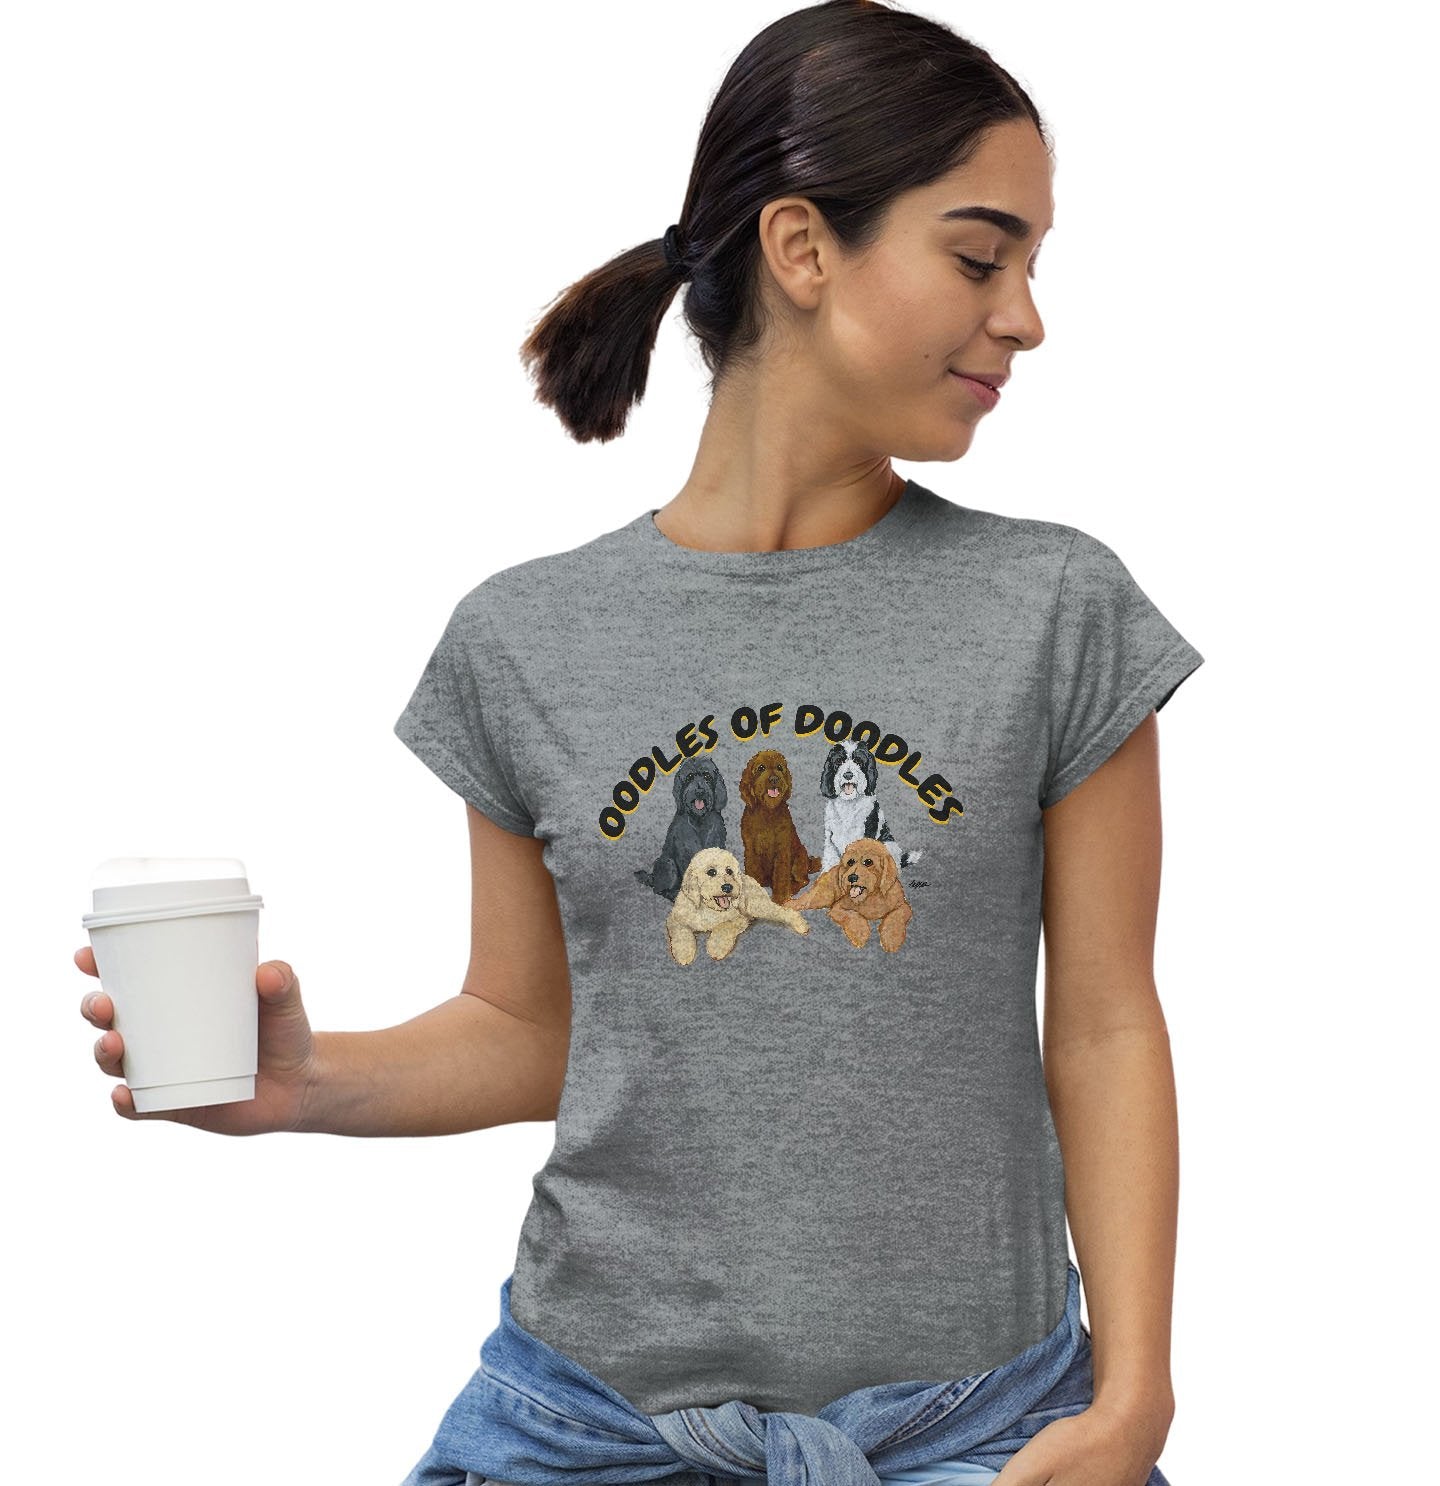 Oodles of Doodles - Women's Fitted T-Shirt